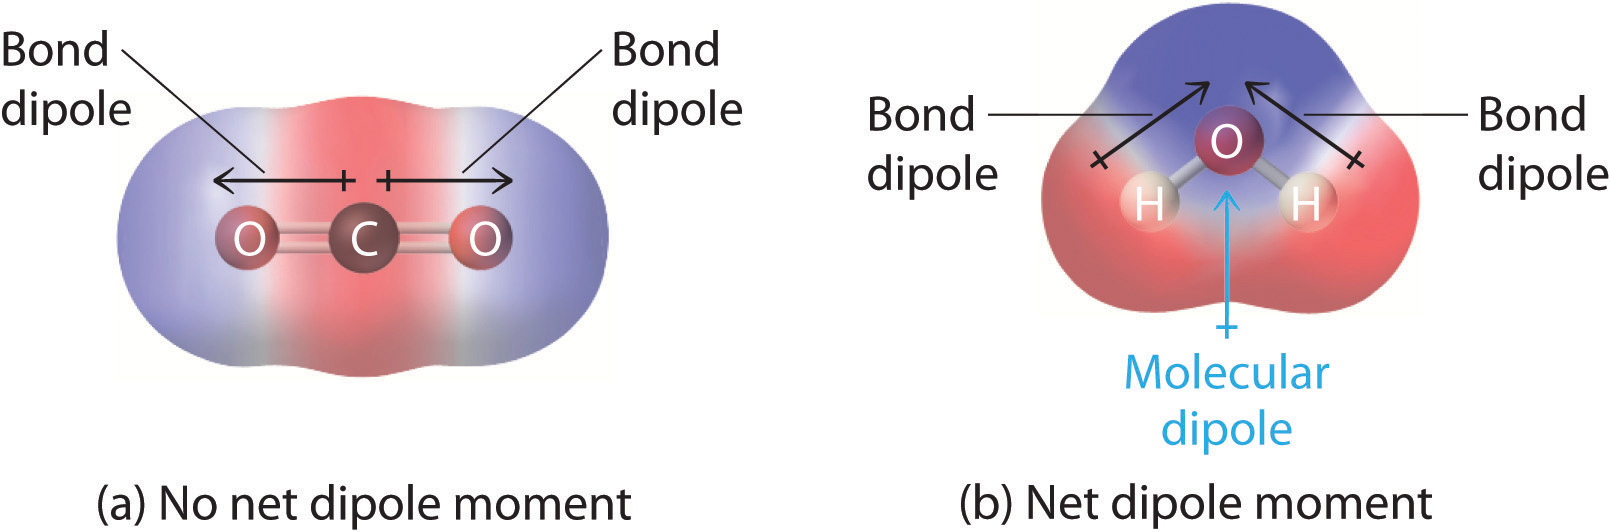 A) No net dipole moment as the dipoles point in opposite direction. B) Net dipole moment. 